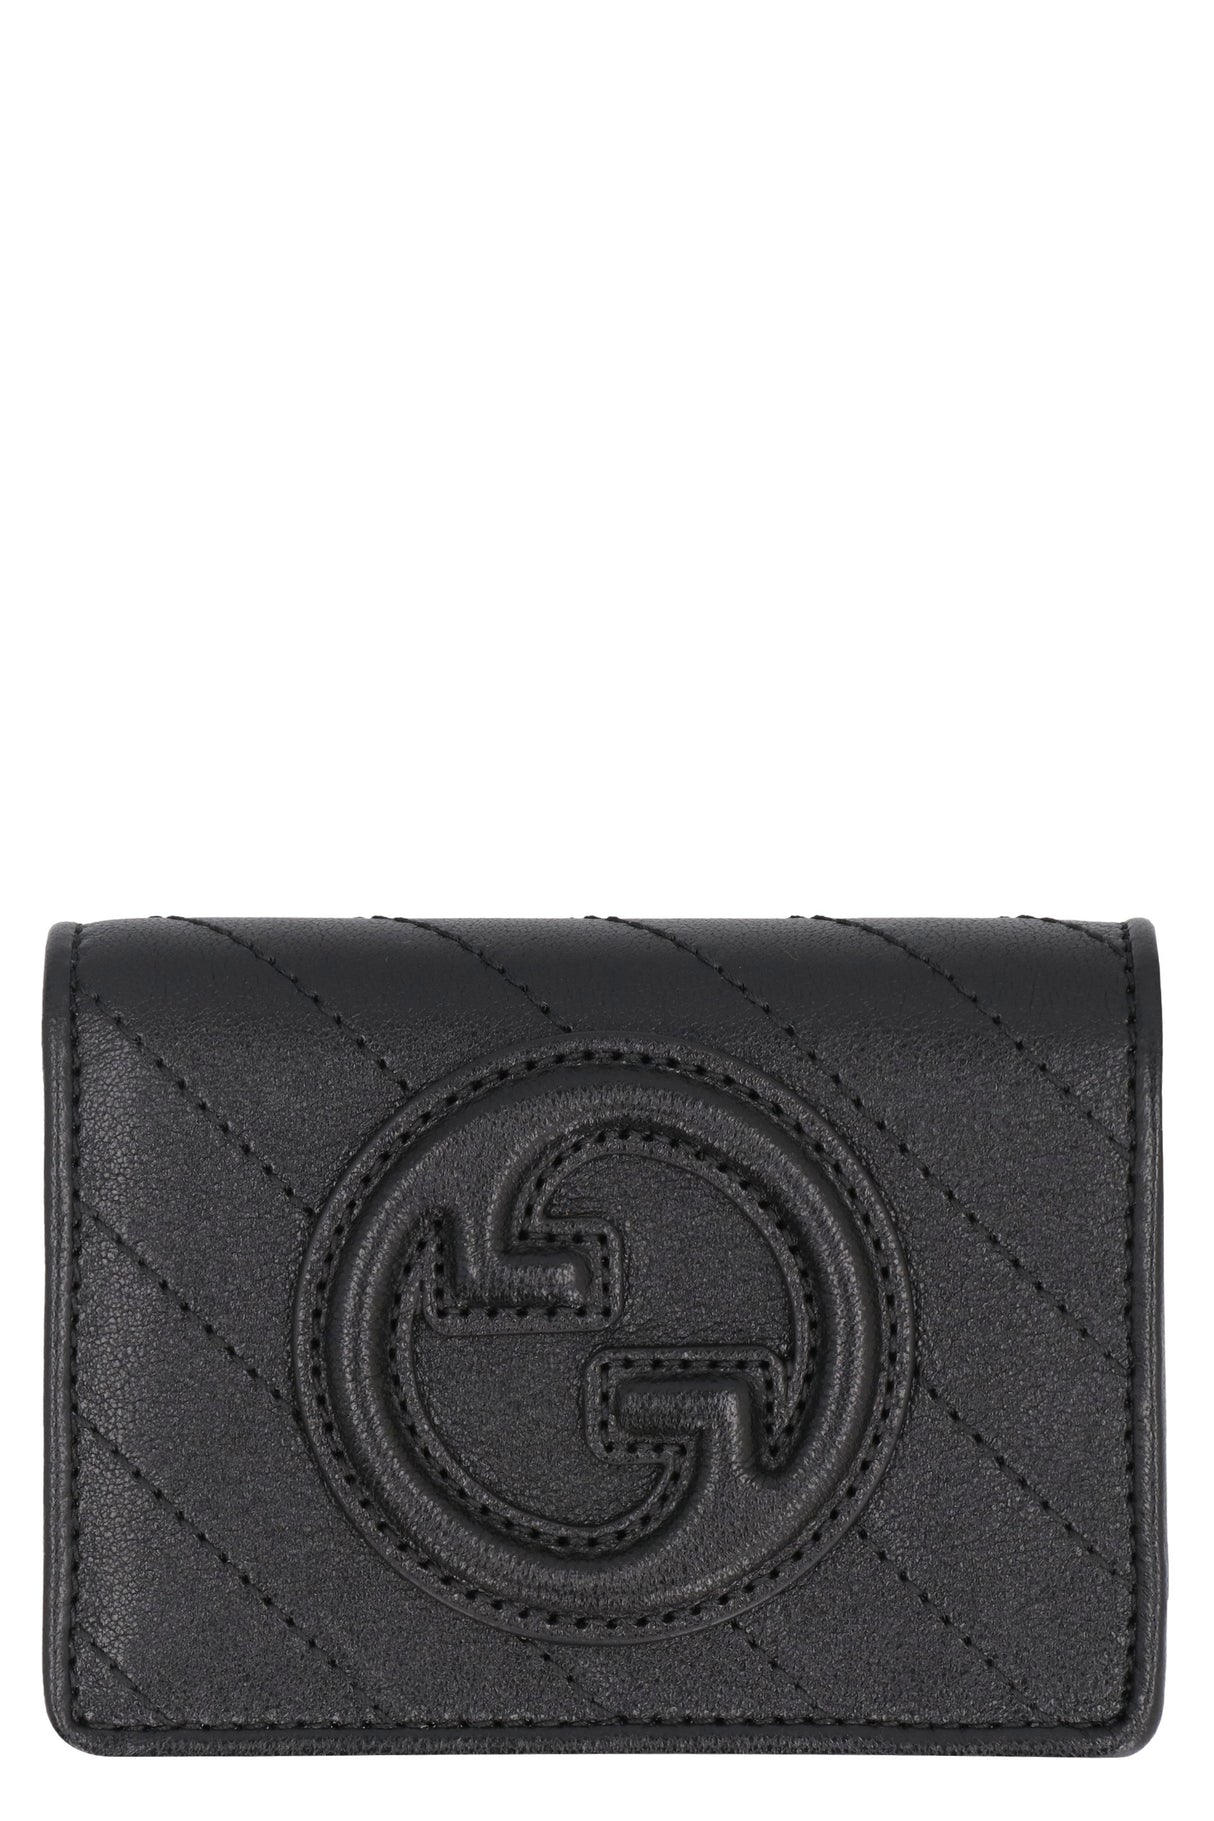 GUCCI Black Lamb Leather Card Holder for Women - FW23 Collection